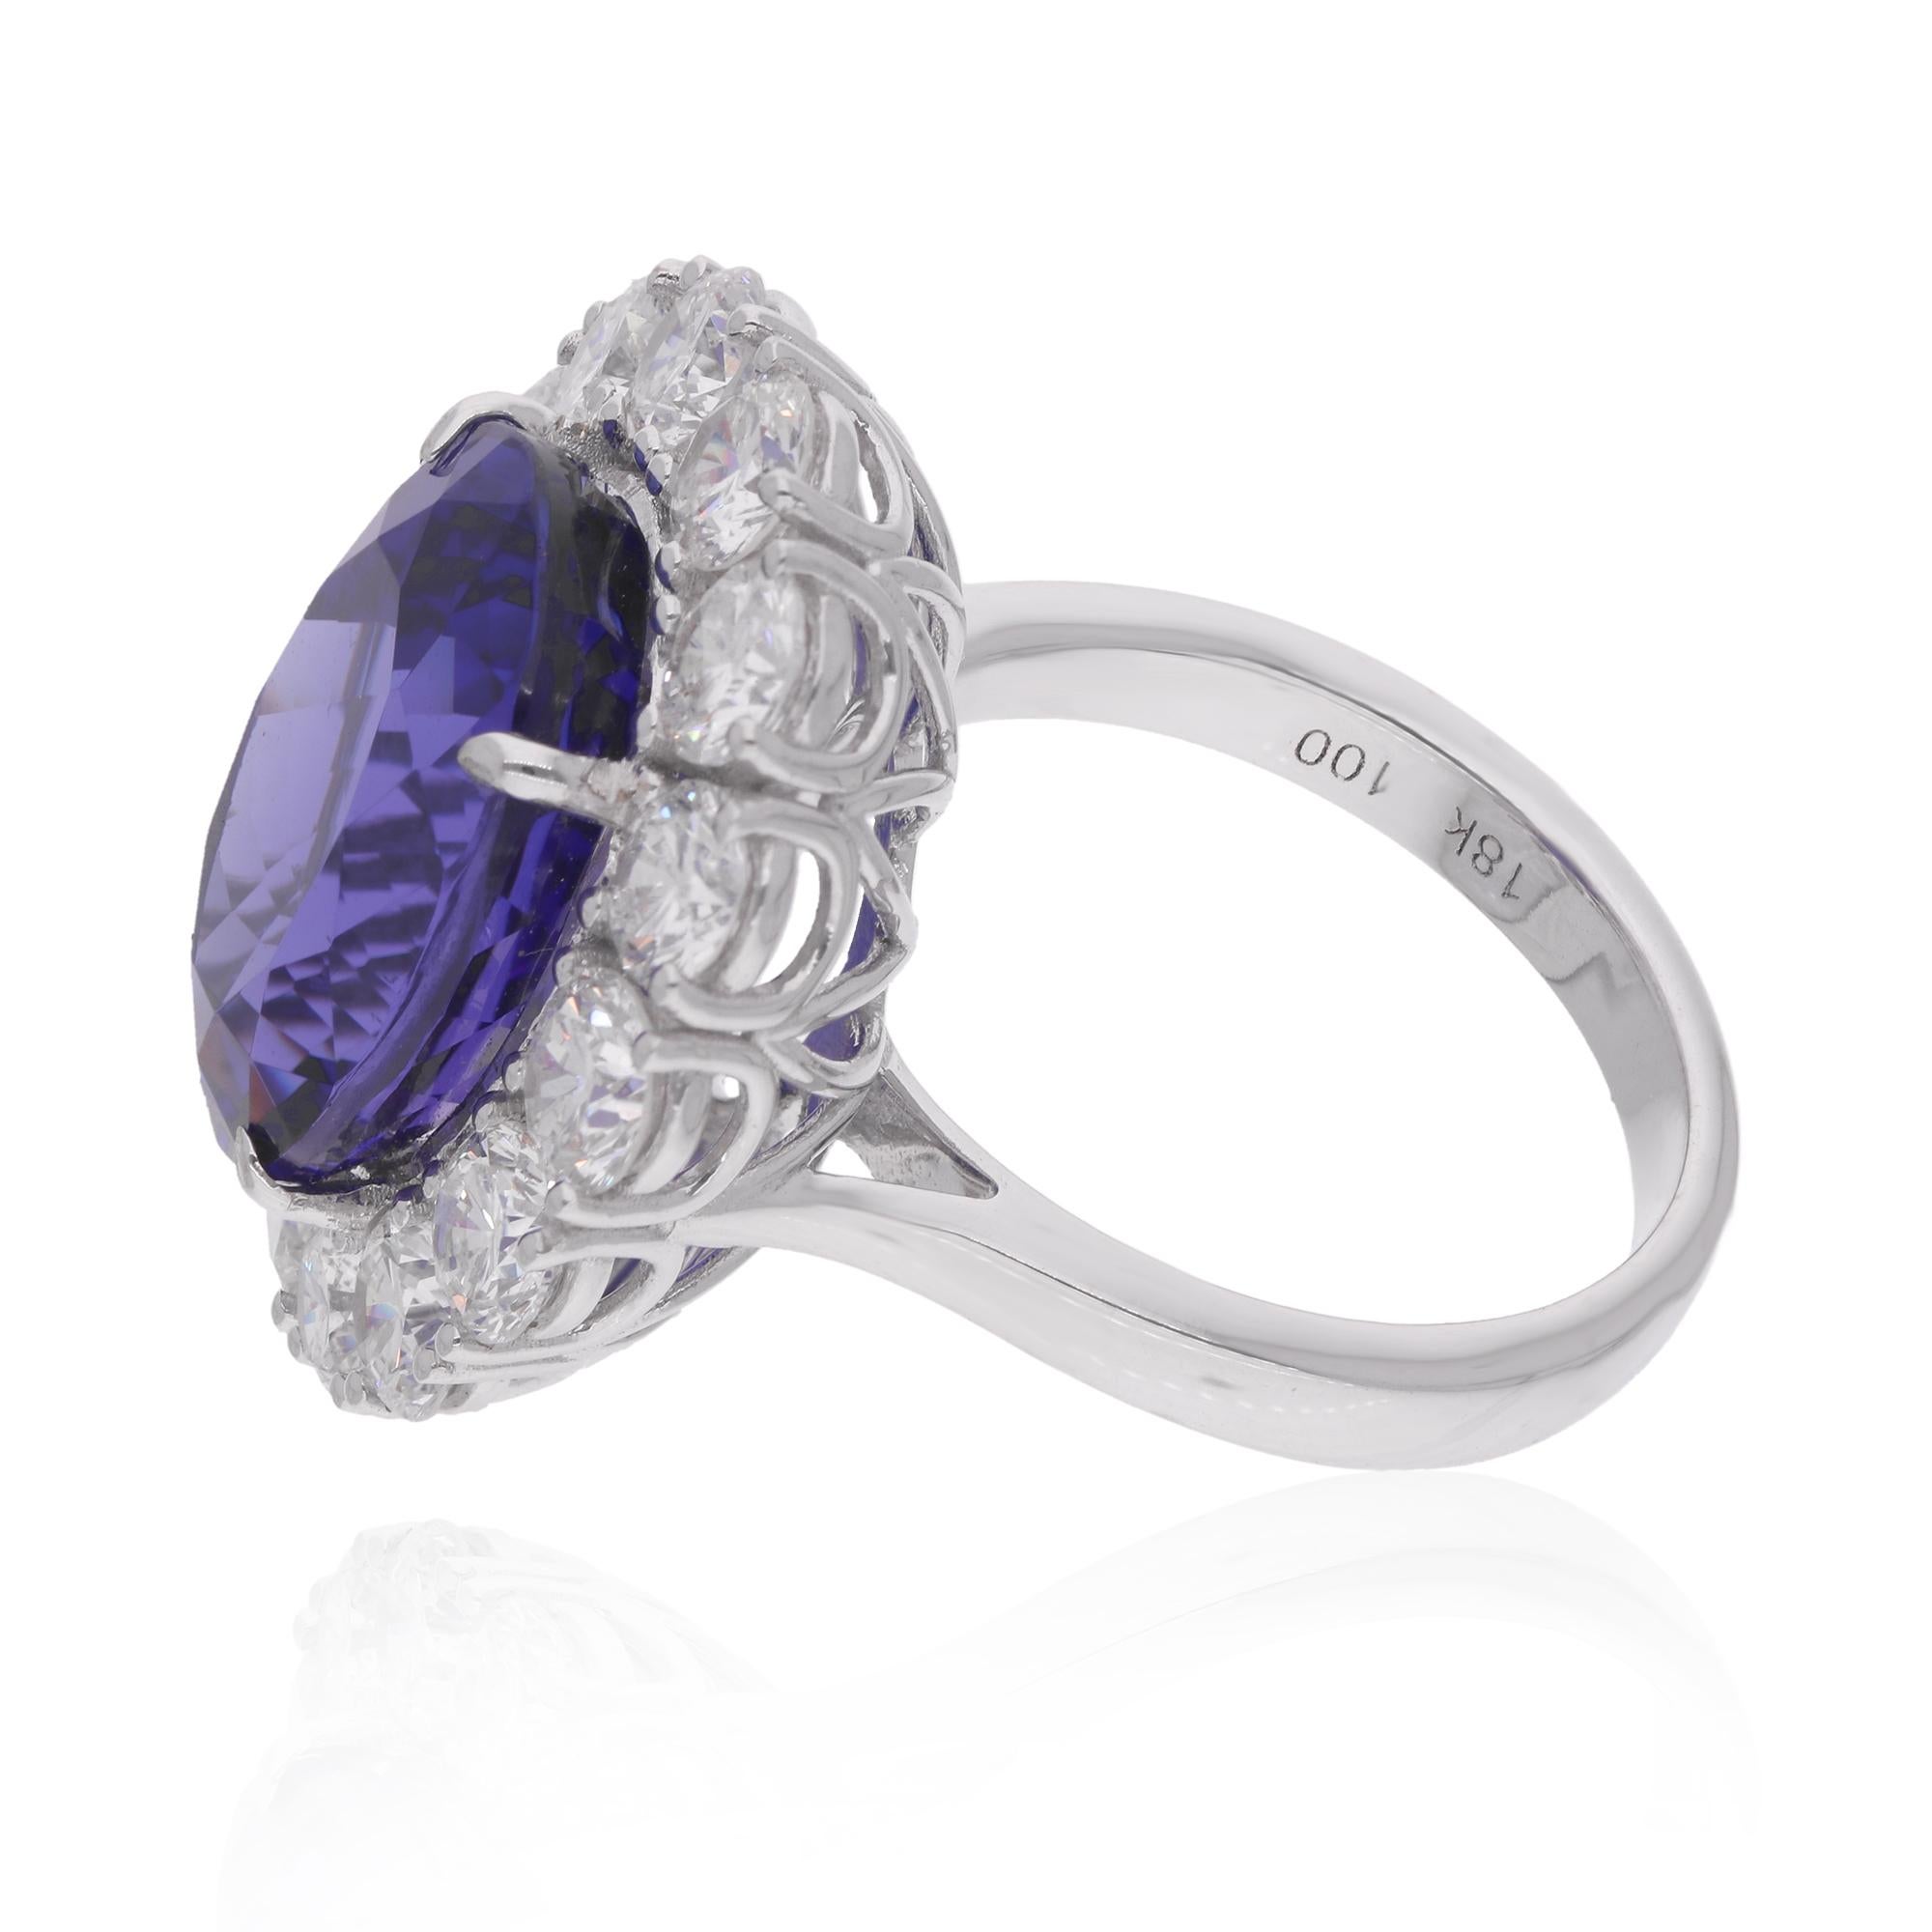 Embrace the allure of luxury with this exquisite Natural Tanzanite Gemstone Cocktail Ring, accented by dazzling Diamonds and crafted in elegant 14 Karat White Gold. This statement piece exudes sophistication and charm, making it a captivating